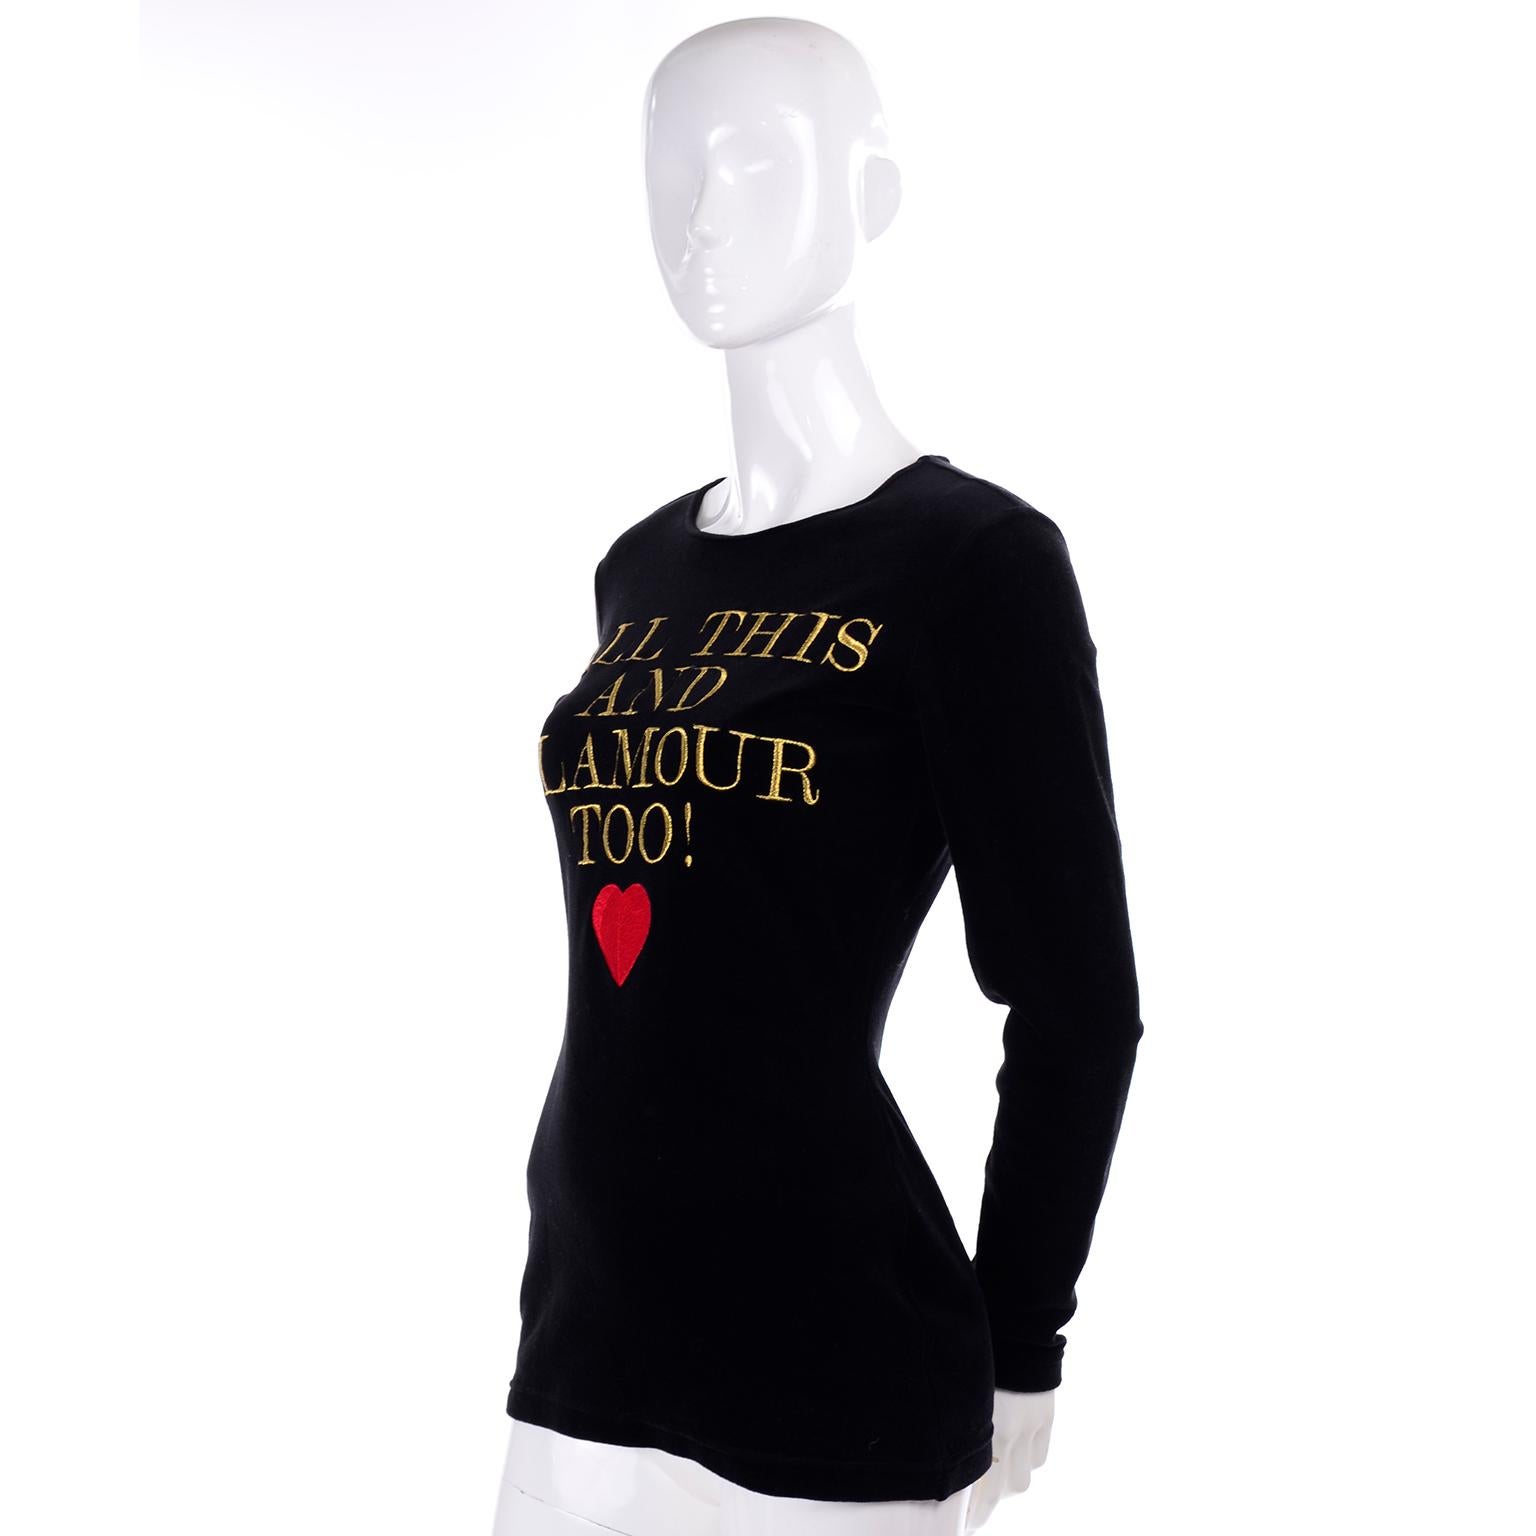 Women's 1980s Franco Moschino All This and Glamour Too Vintage Black Top W Red Heart